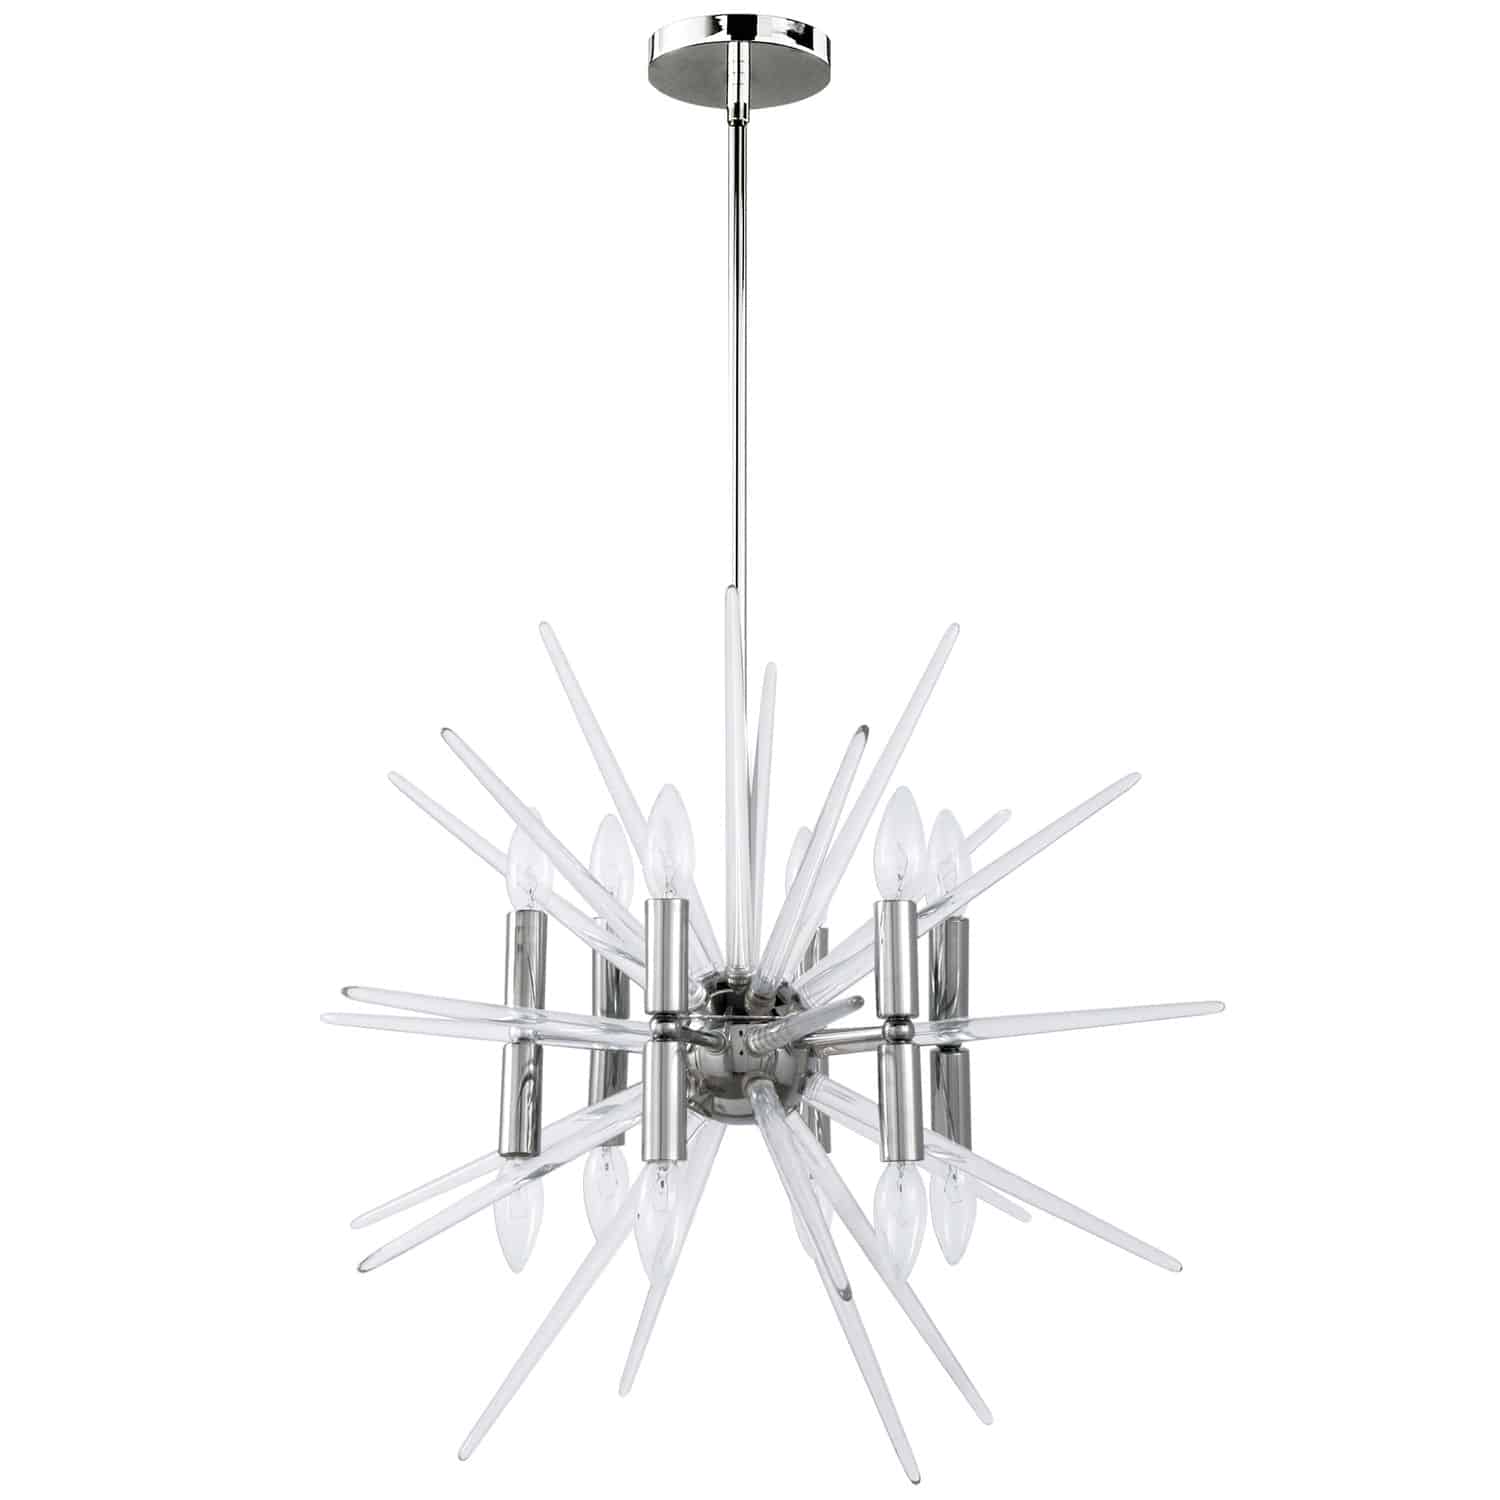 The Vela family of lighting has a thoroughly modern appeal, with sleek finishes and reflective surfaces. It's an uncommonly artistic multi-dimensional construction that is sure to garner attention. The metal frame features a central globe, with lights set vertically at either end of arms that spoke out from it. Gleaming acrylic spikes punctuate the design above, below and through the light housing. A living room or kitchen, or stylish foyer, is the perfect setting for the bright and beautiful Vela family of lights.